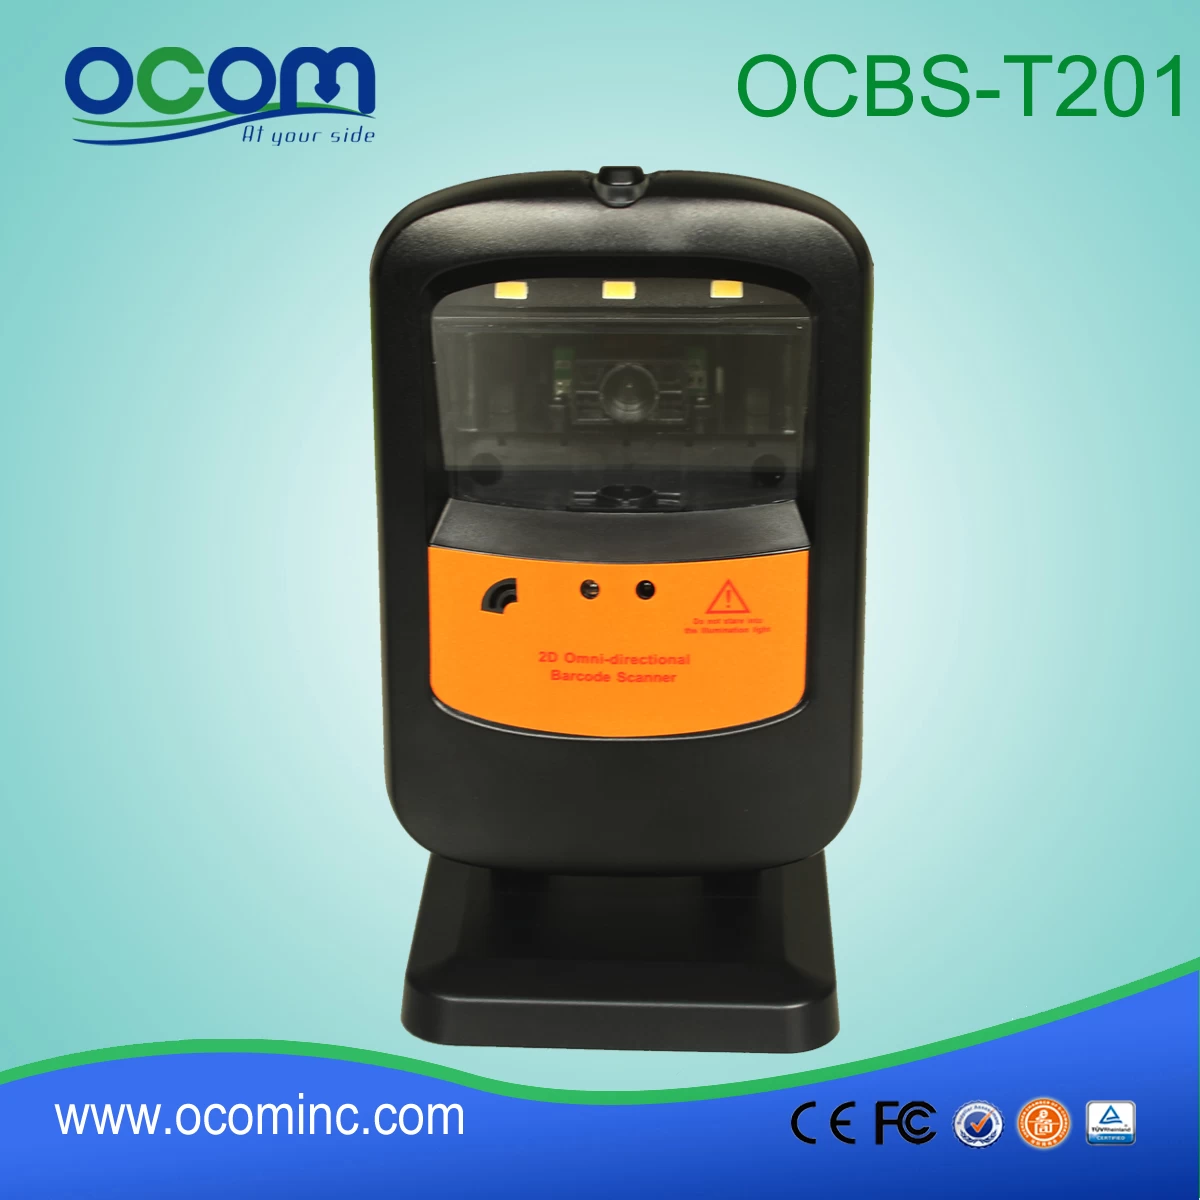 OCBS-T201:omnidirectional barcode scanner rs232, barcode scanner inventory